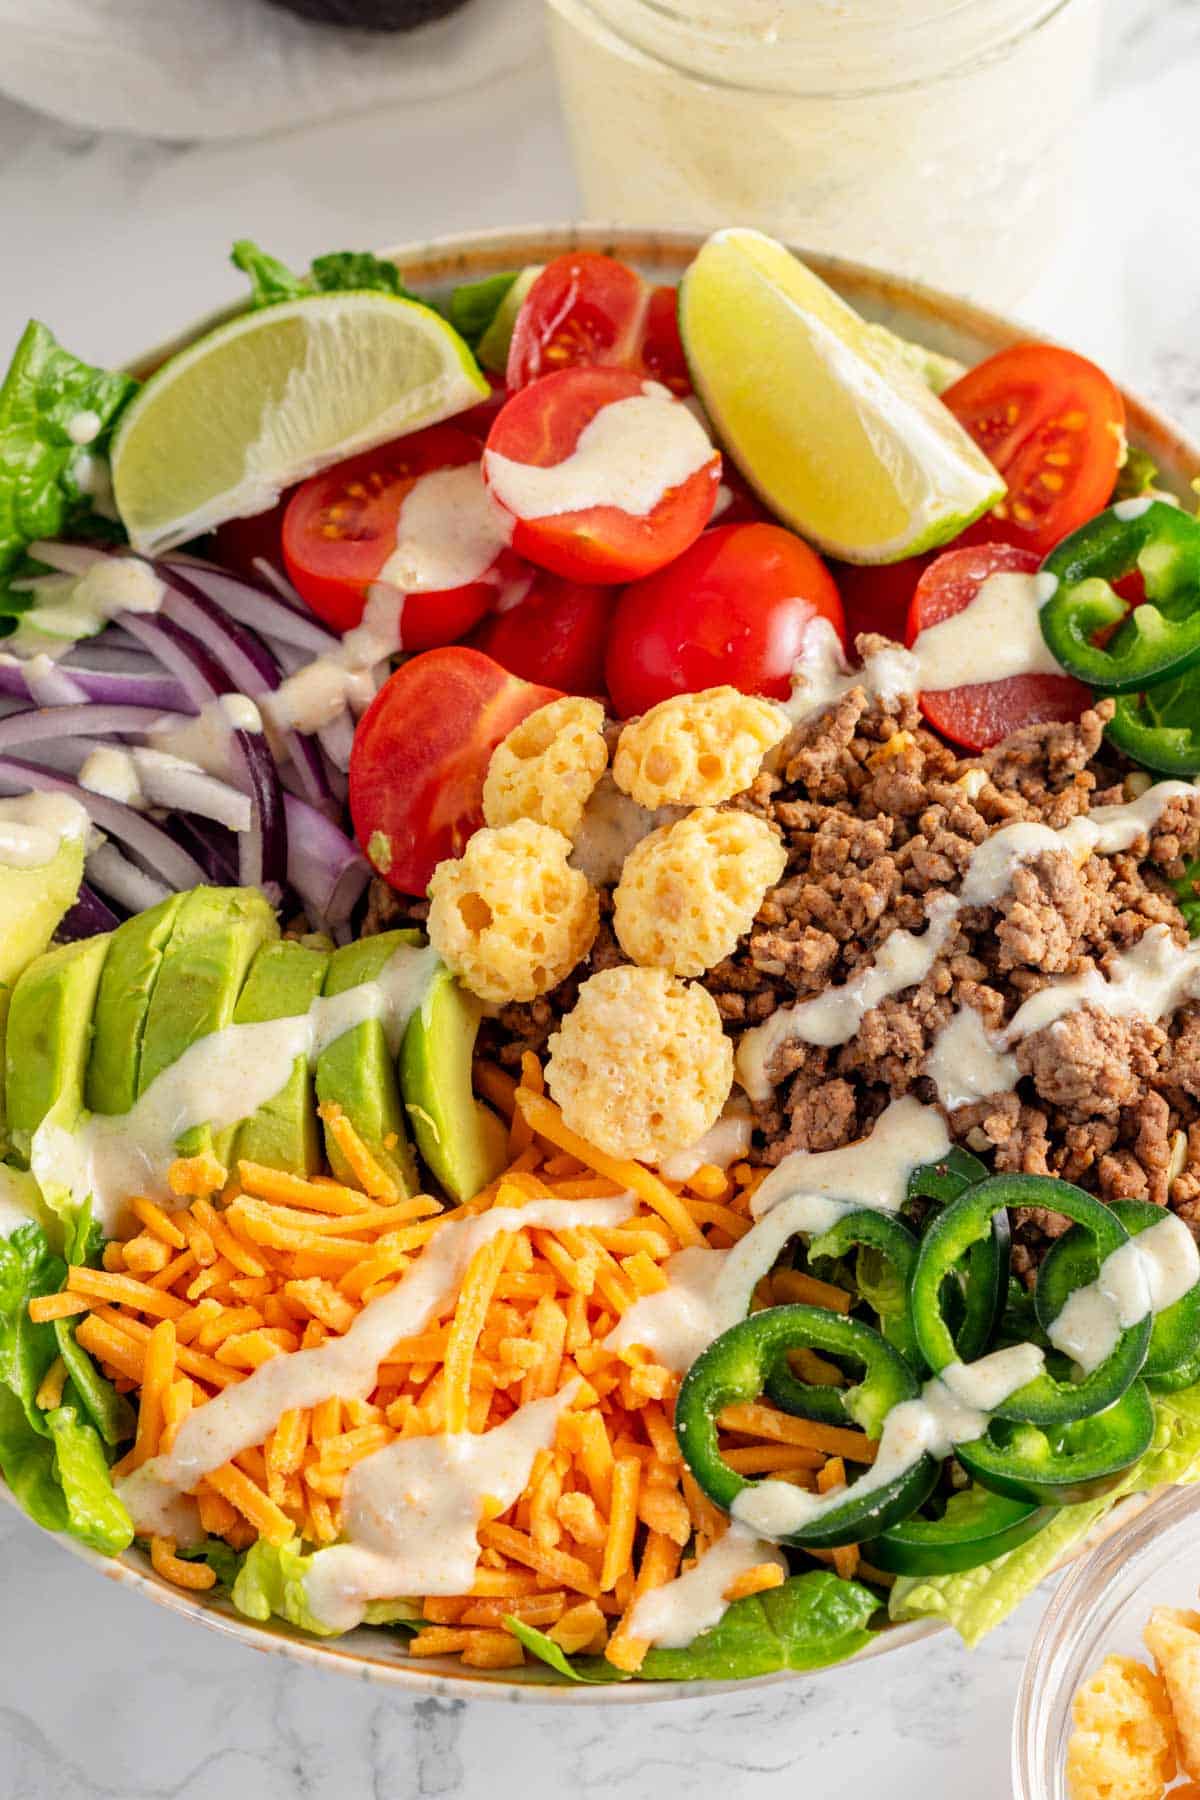 assembled taco salad with white dressing.